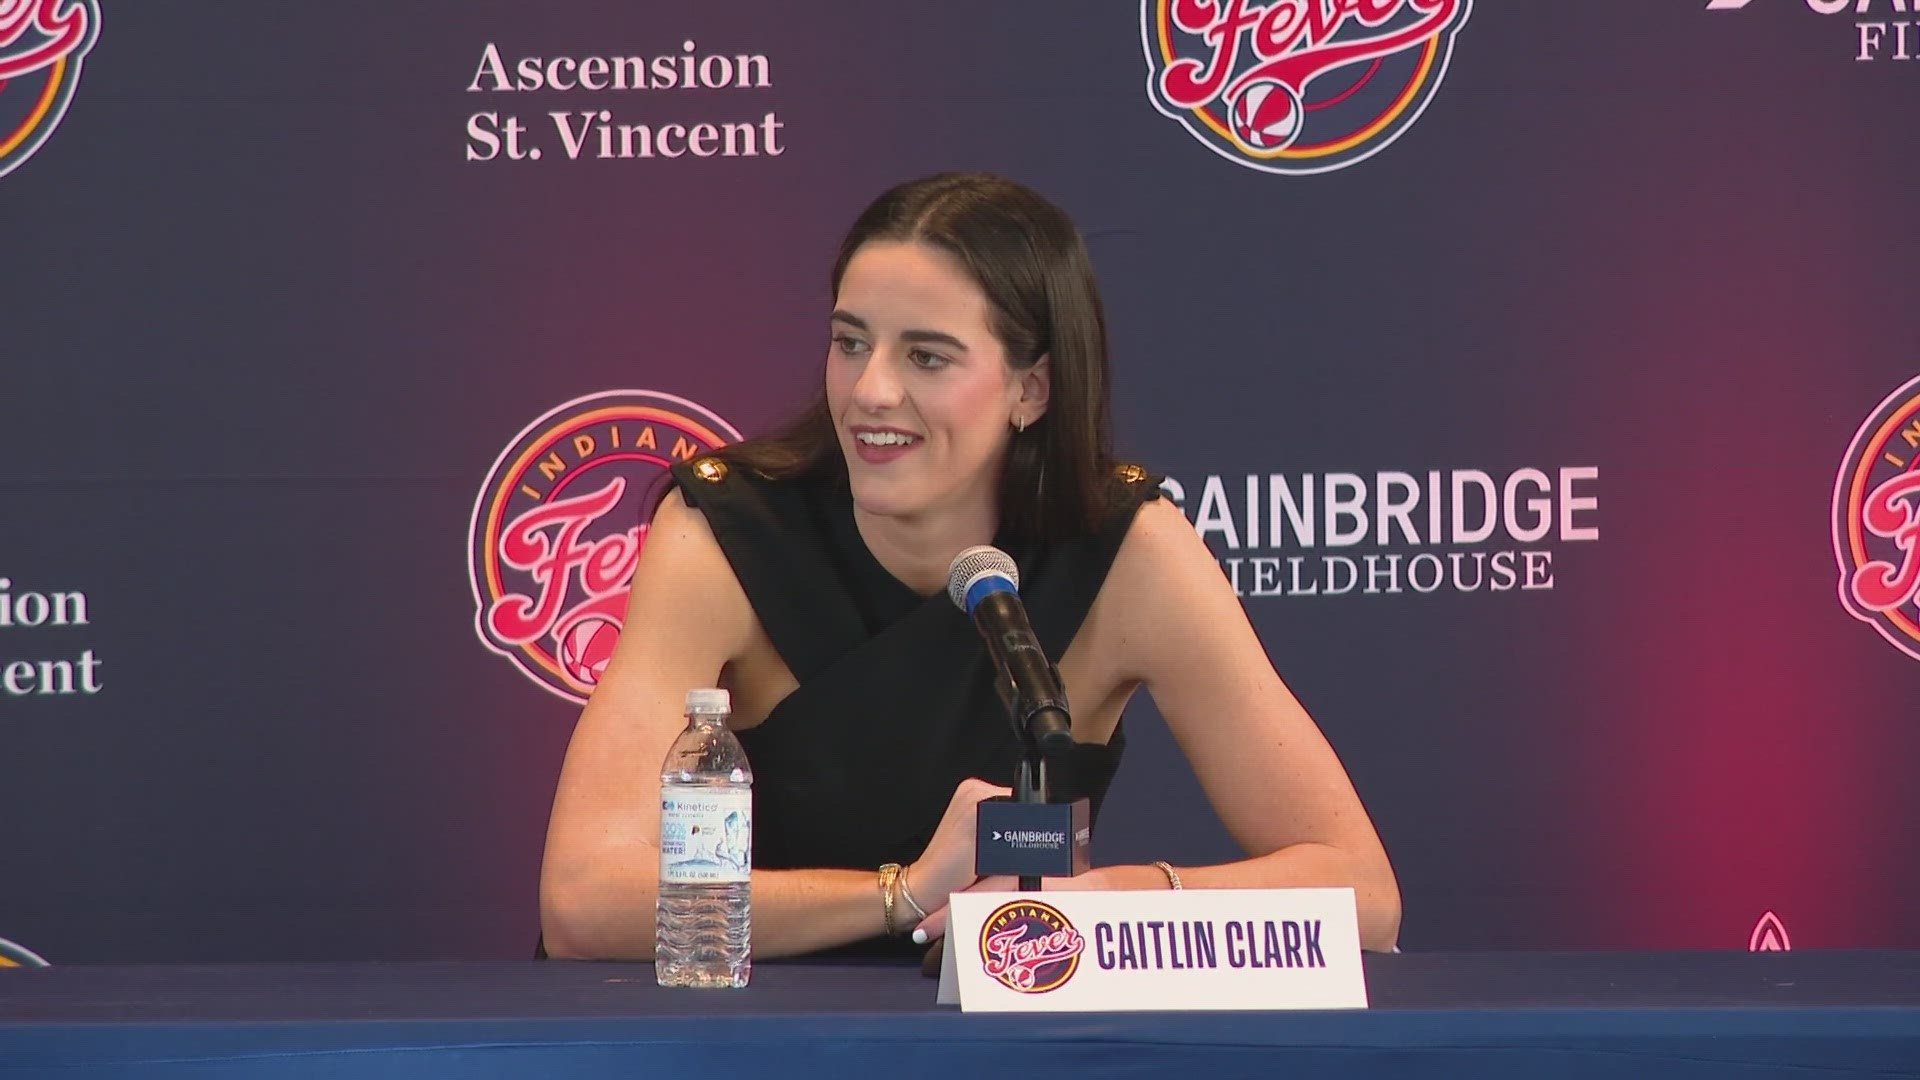 13Sports director Dave Calabro reports on Caitlin Clark's homecoming to Indianapolis.